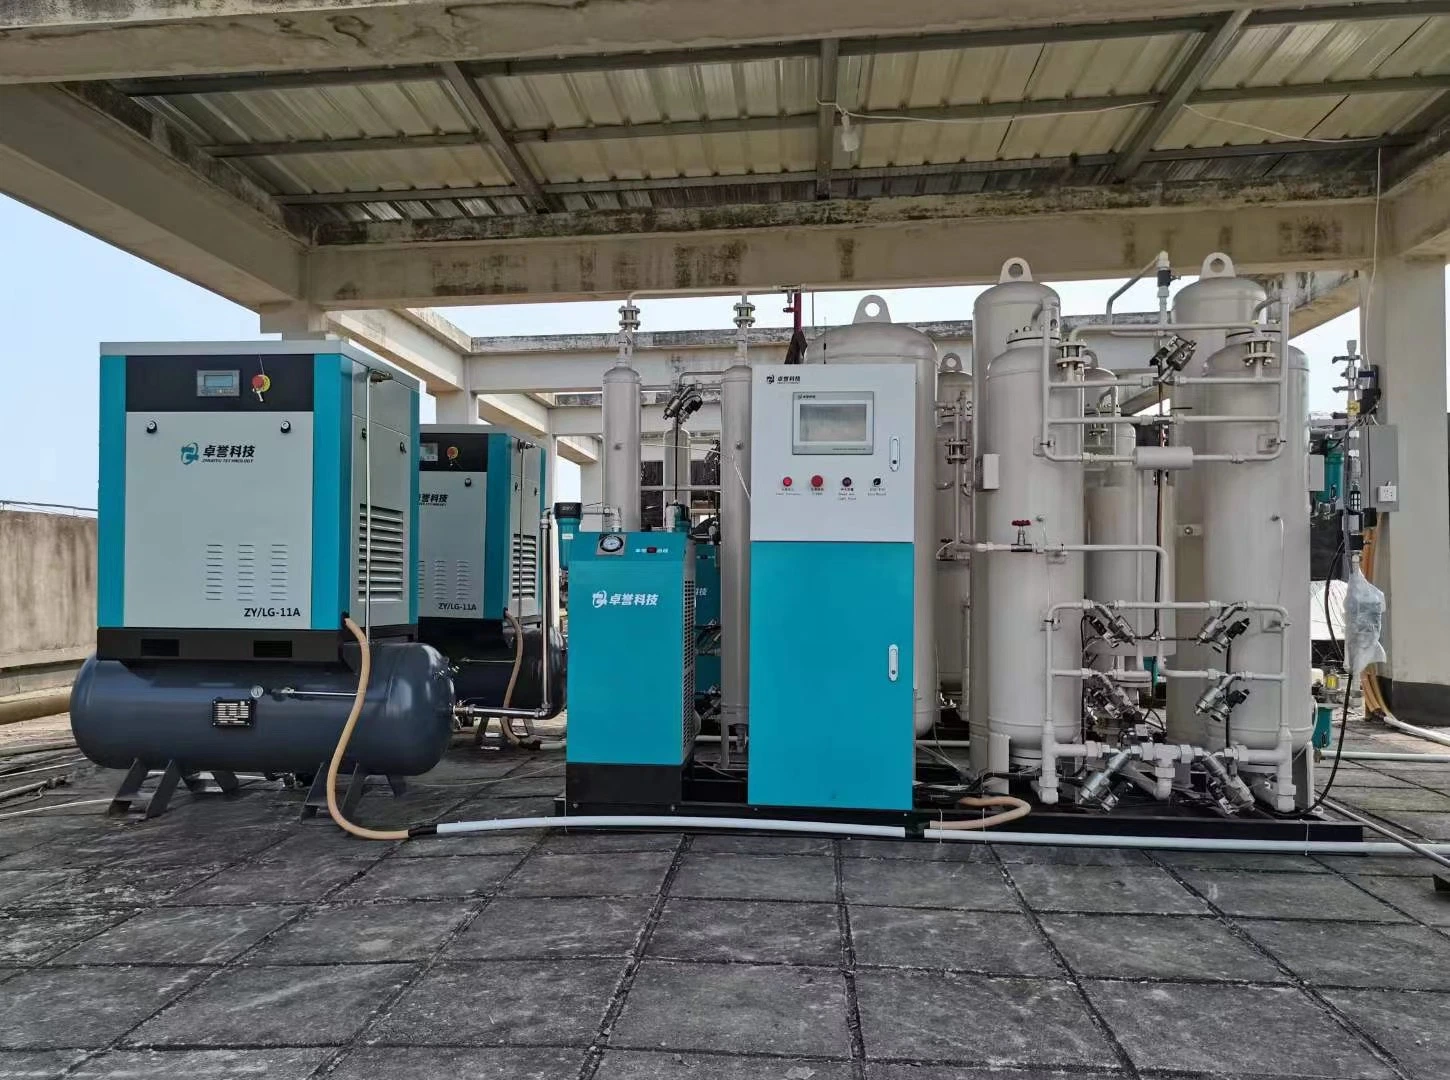 Medicinal Oxygen Generating Plant with Psa Technology with High Purity